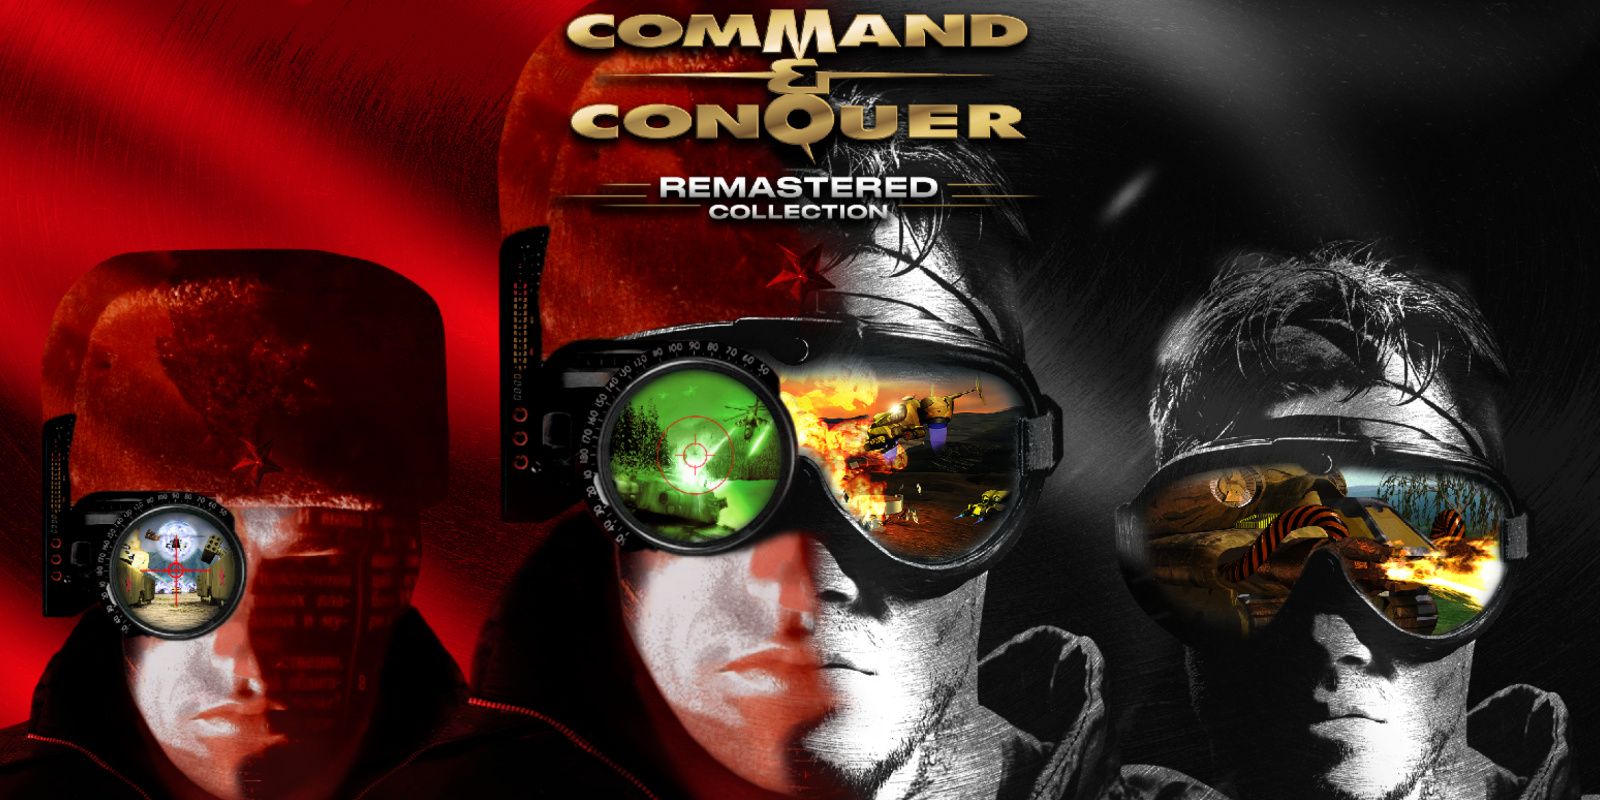 Cover of the Command & Conquer Remastered Collection